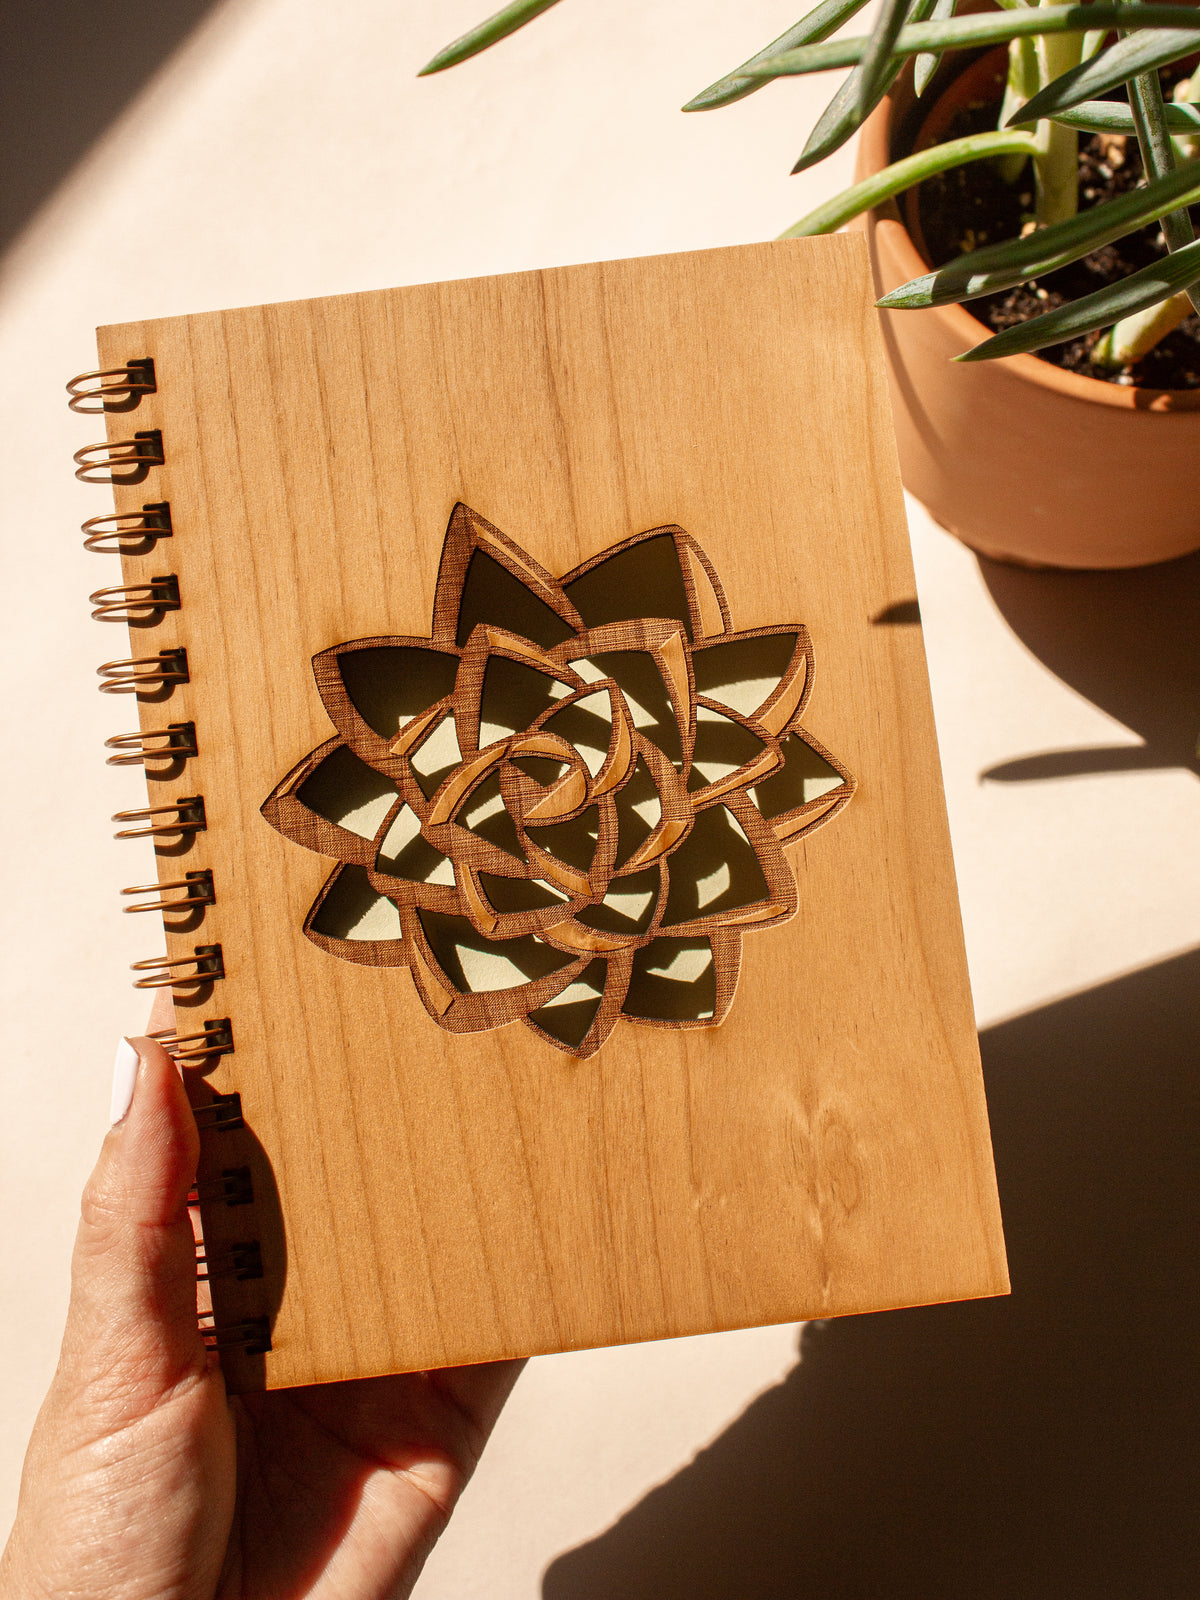 Hand Crafted Journal/Notebook Turtle Cover Blank Tan Paper Wood Leaves